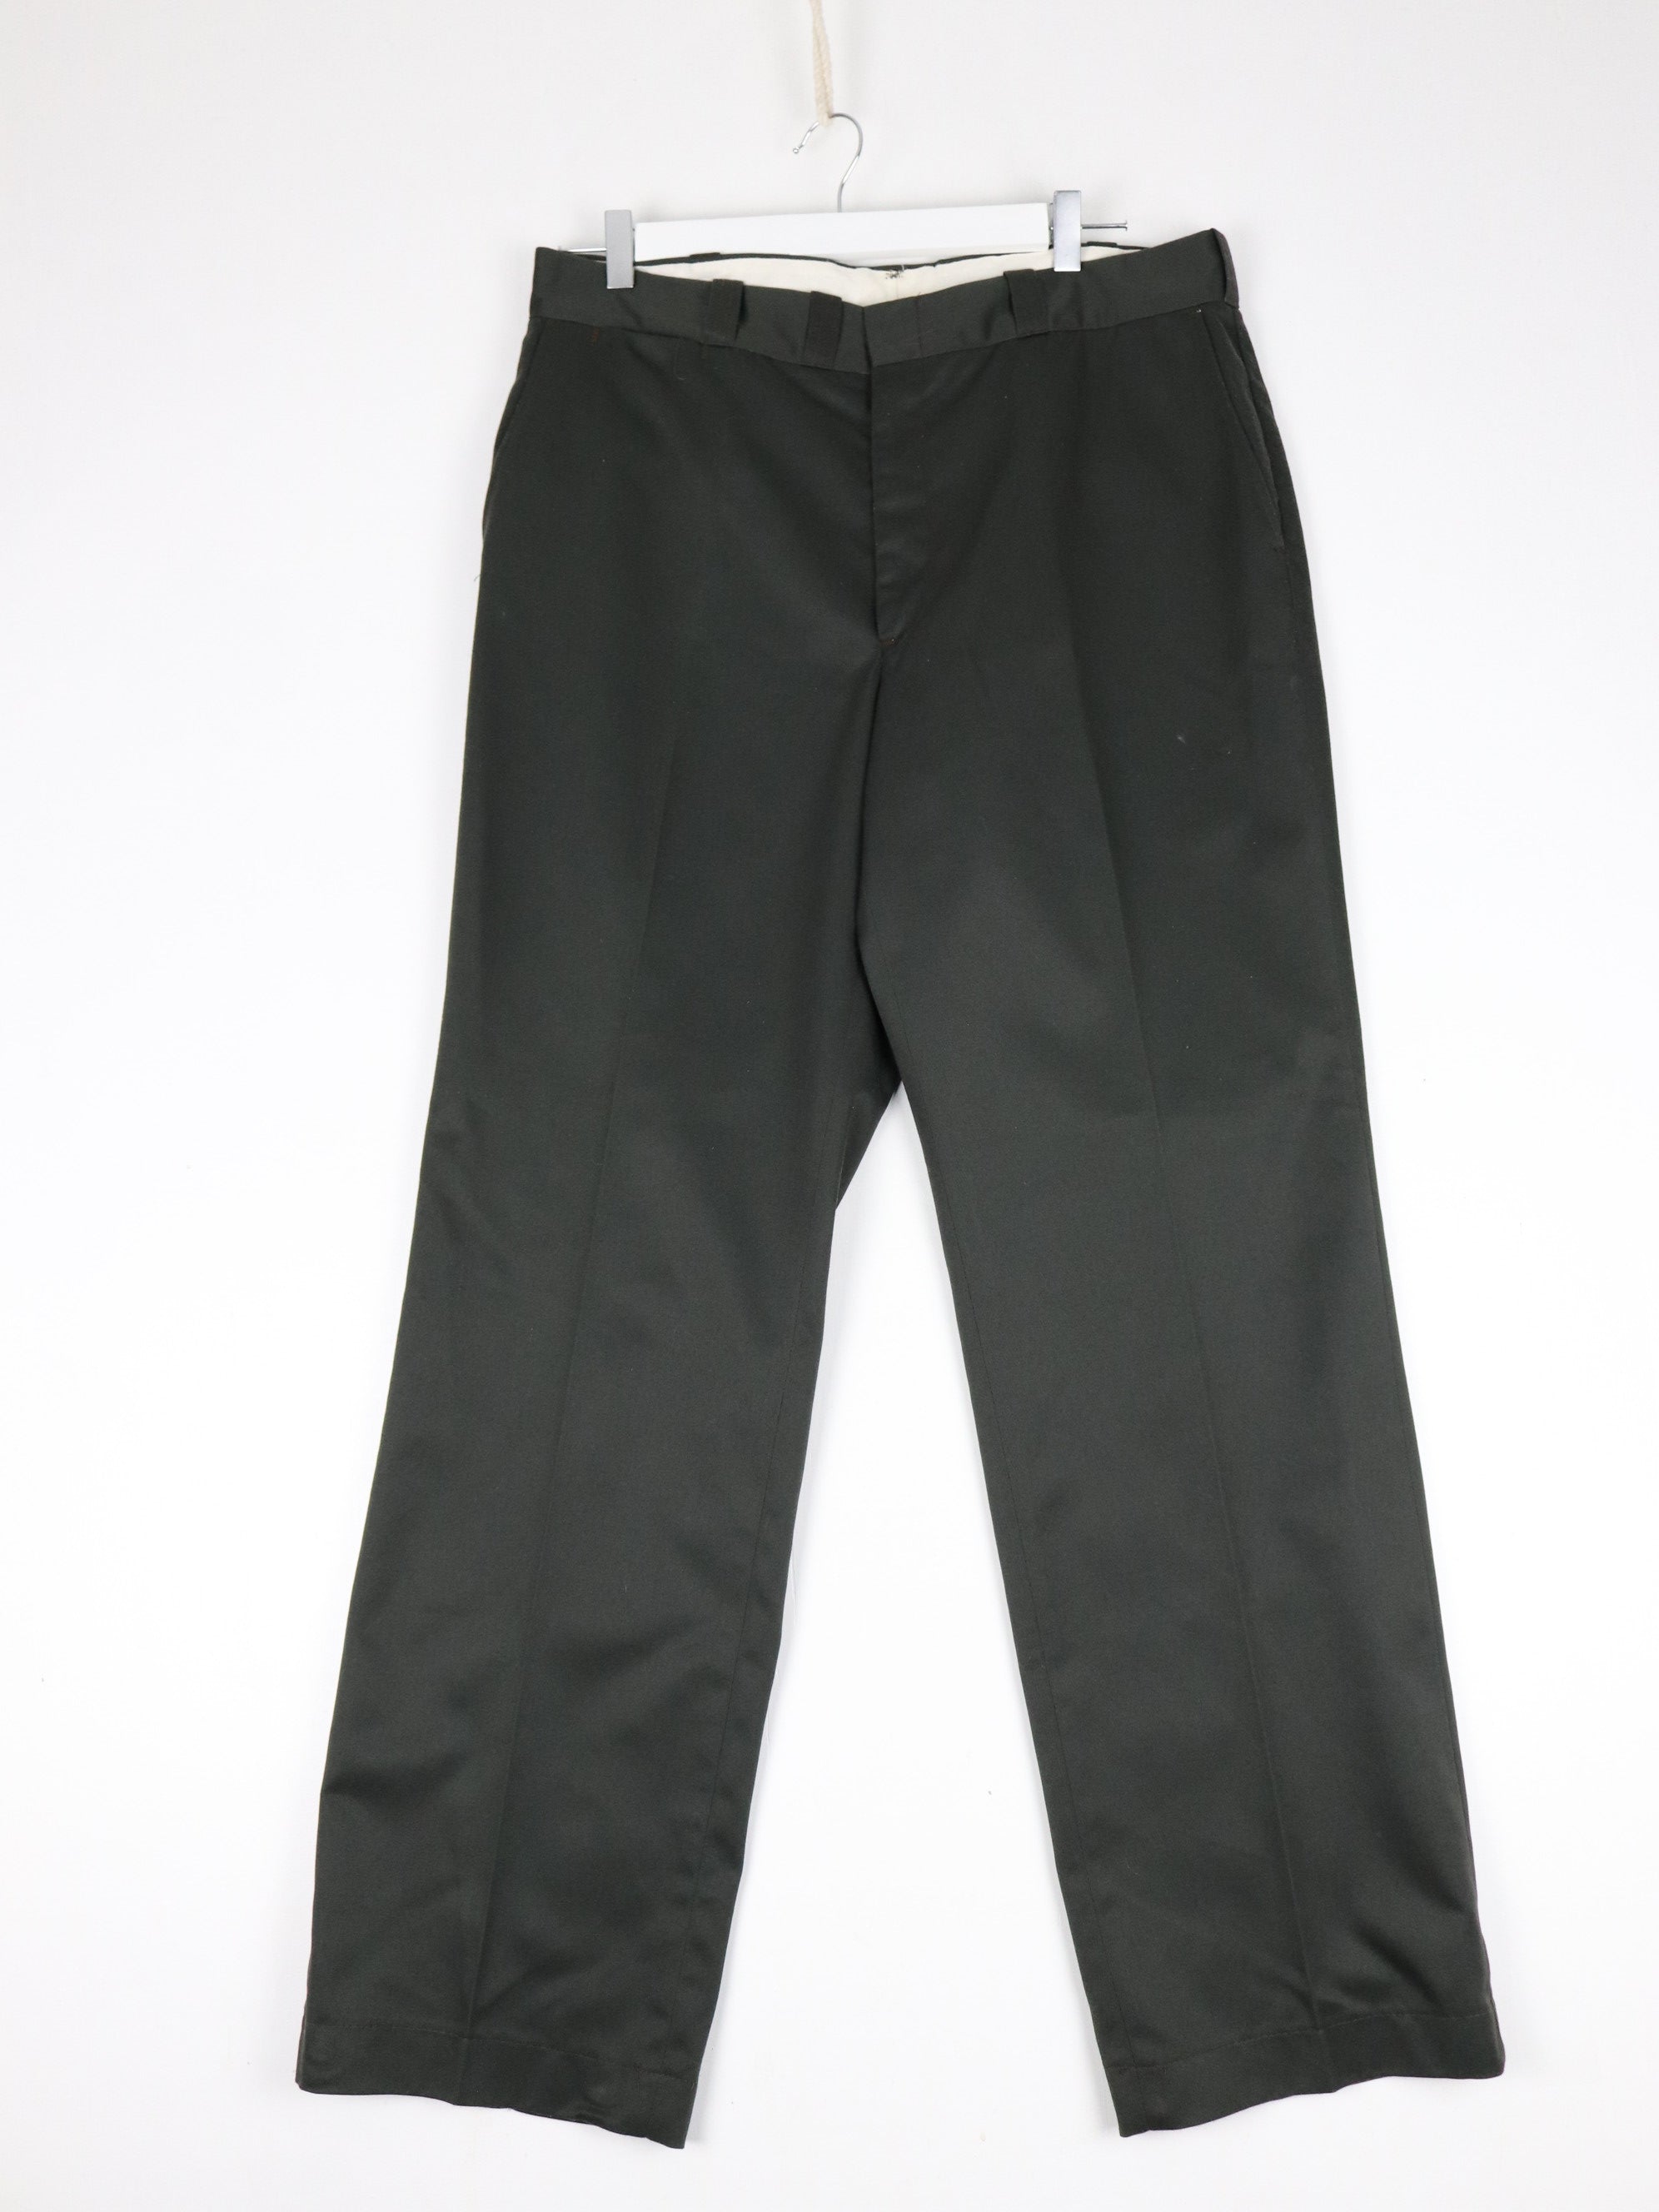 Vintage Dress Pants Mens 36 x 33 Green Pleated Trousers 70s 80s